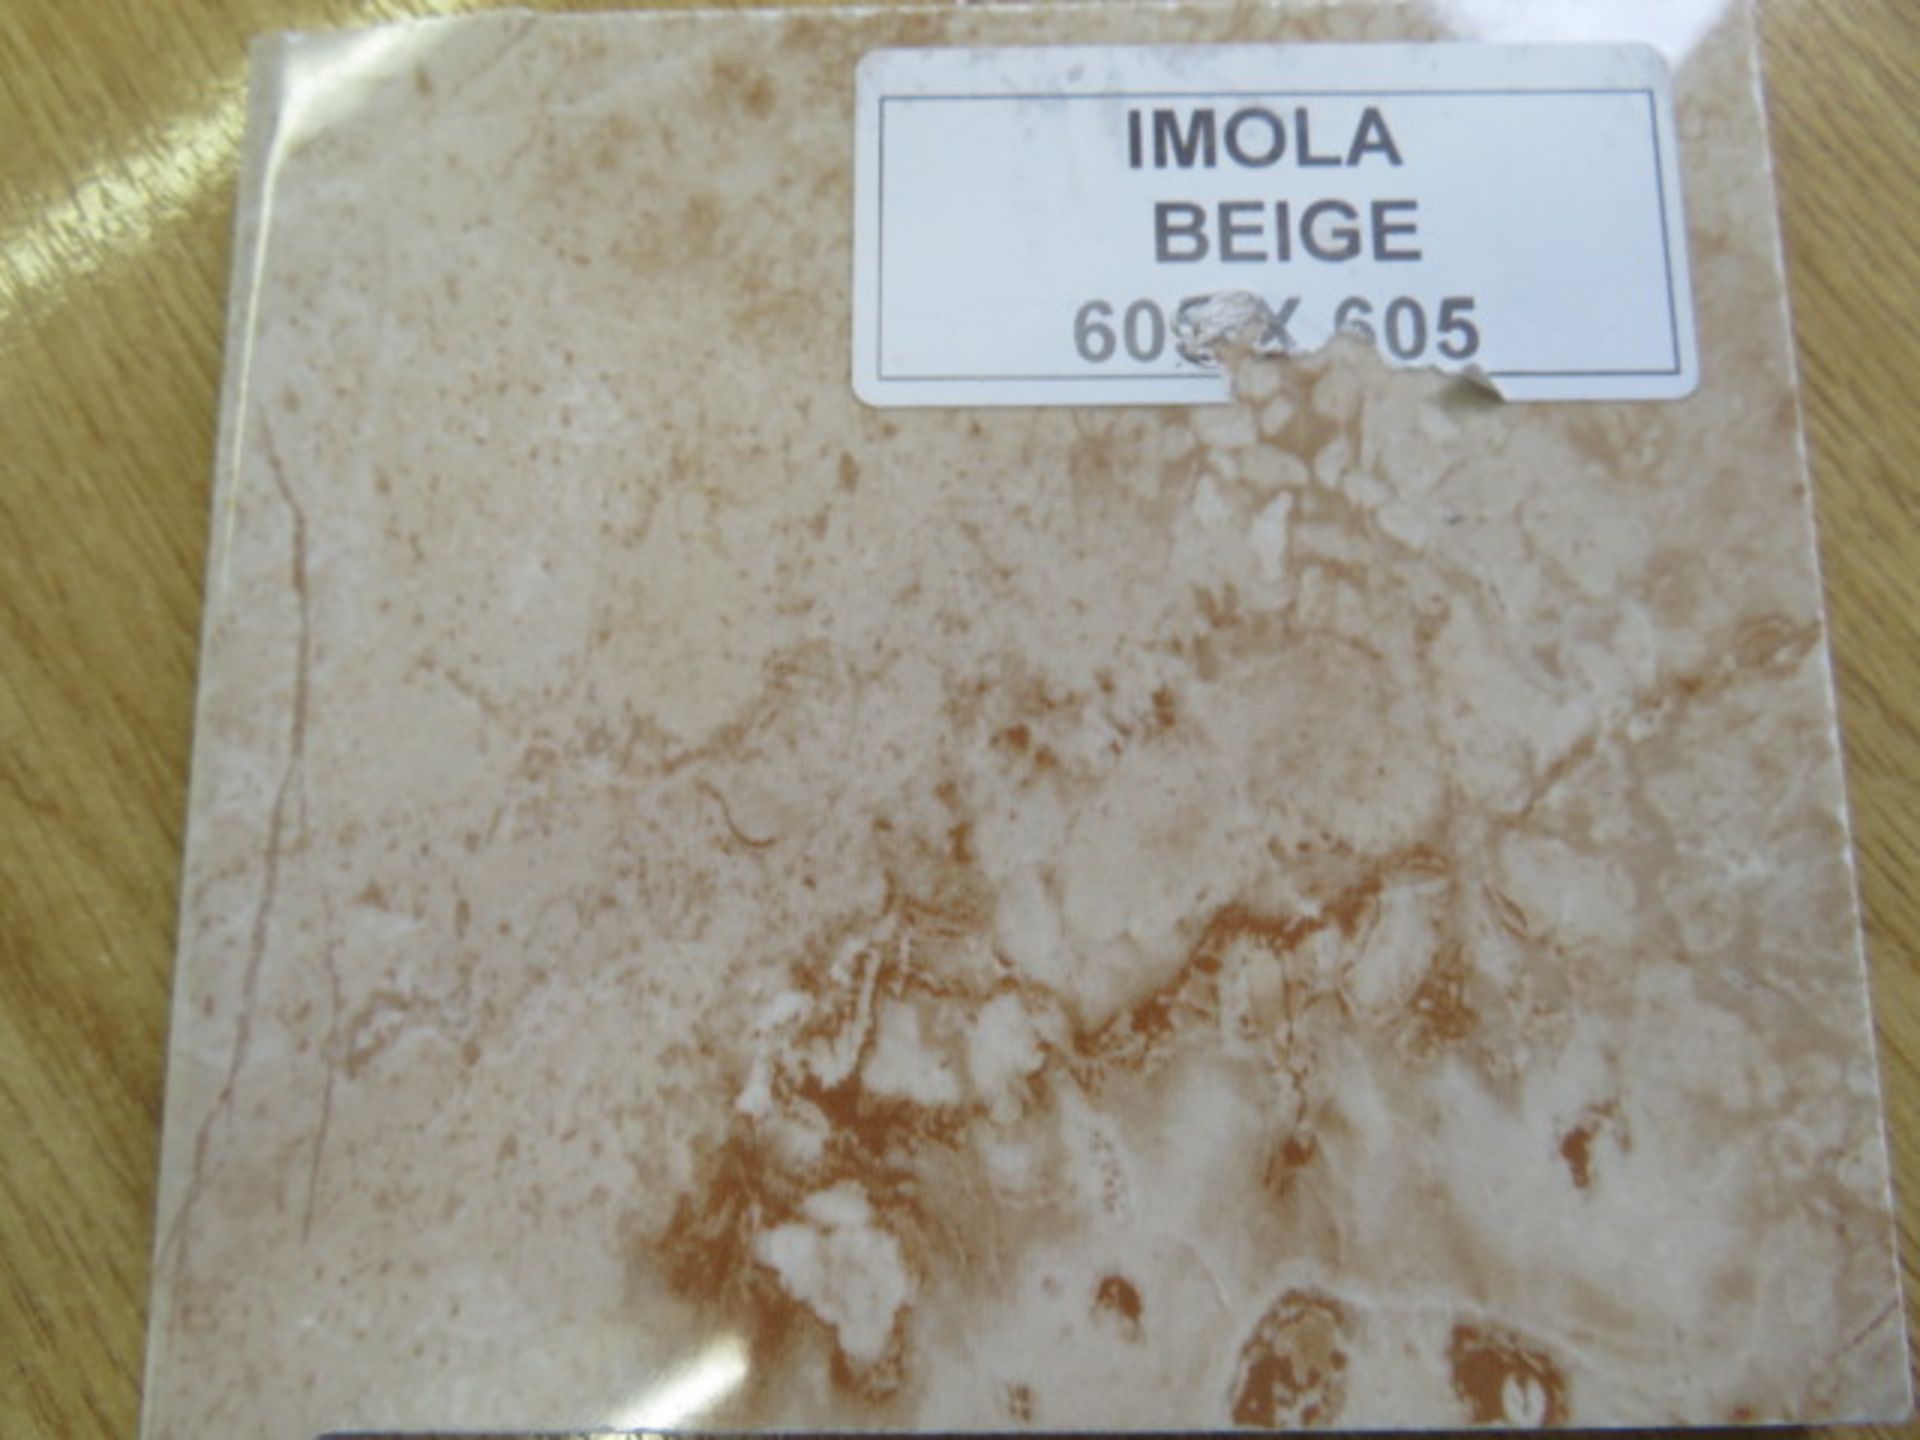 NEW 8.76 Square Meters of Imola Beige Wall and Floor Tiles. 605x605mm per tile, 10mm thick. T... - Image 3 of 4